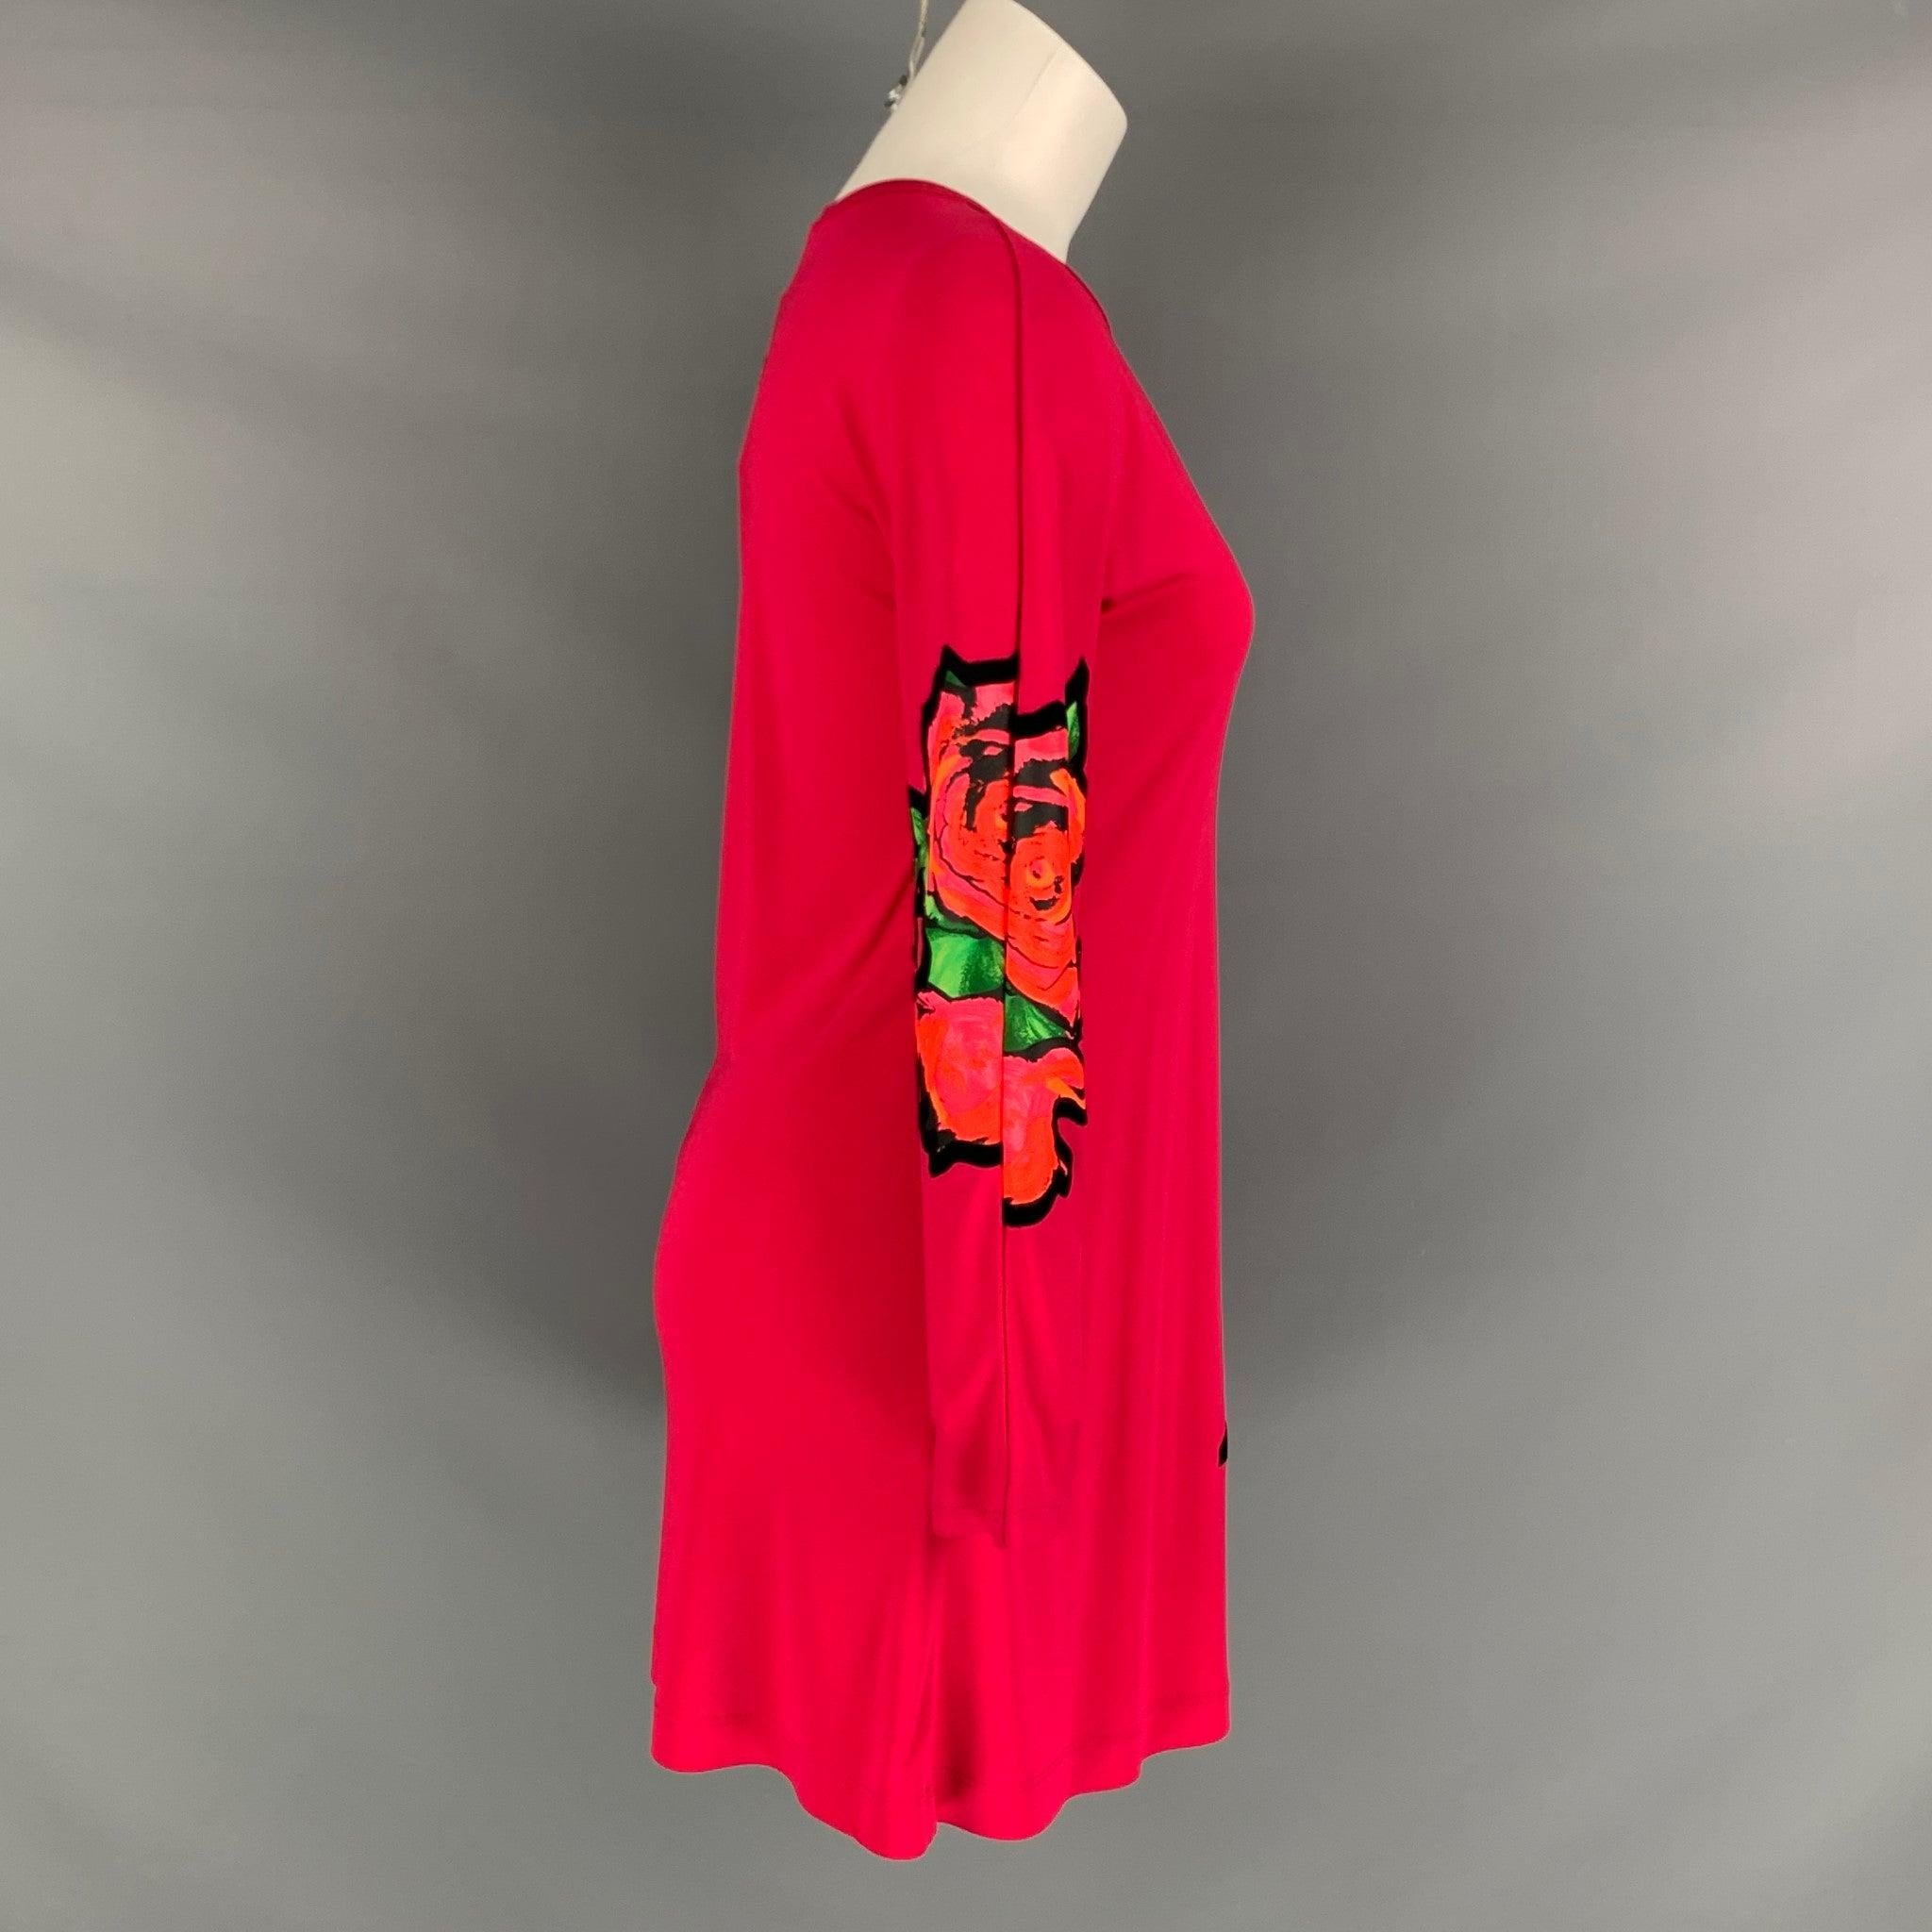 LOUIS VUITTON by MARC JACOBS & STEPHEN SPROUCE long sleeve dress comes in a red multi-color viscose knit material featuring a floral graphic print details. Made in Italy.Very Good Pre-Owned Condition. Minor signs of wear. 

Marked:  36